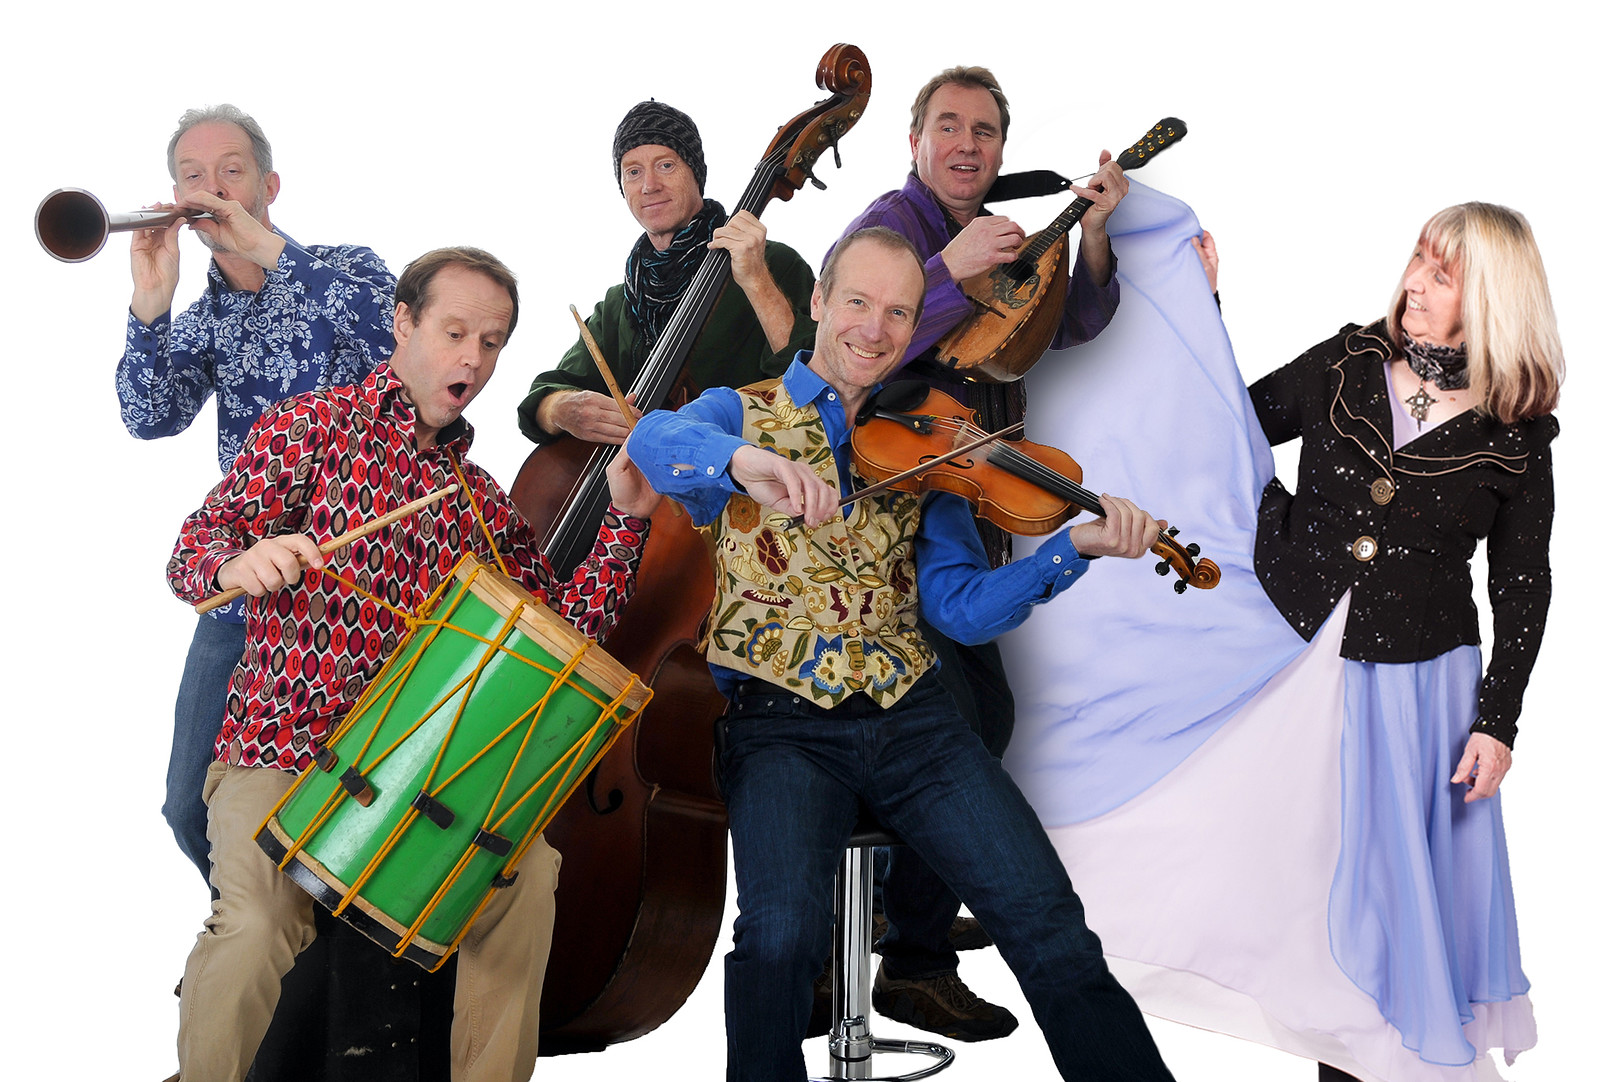 Carols&Capers, Maddy Prior And The Carnvial Band at St George's